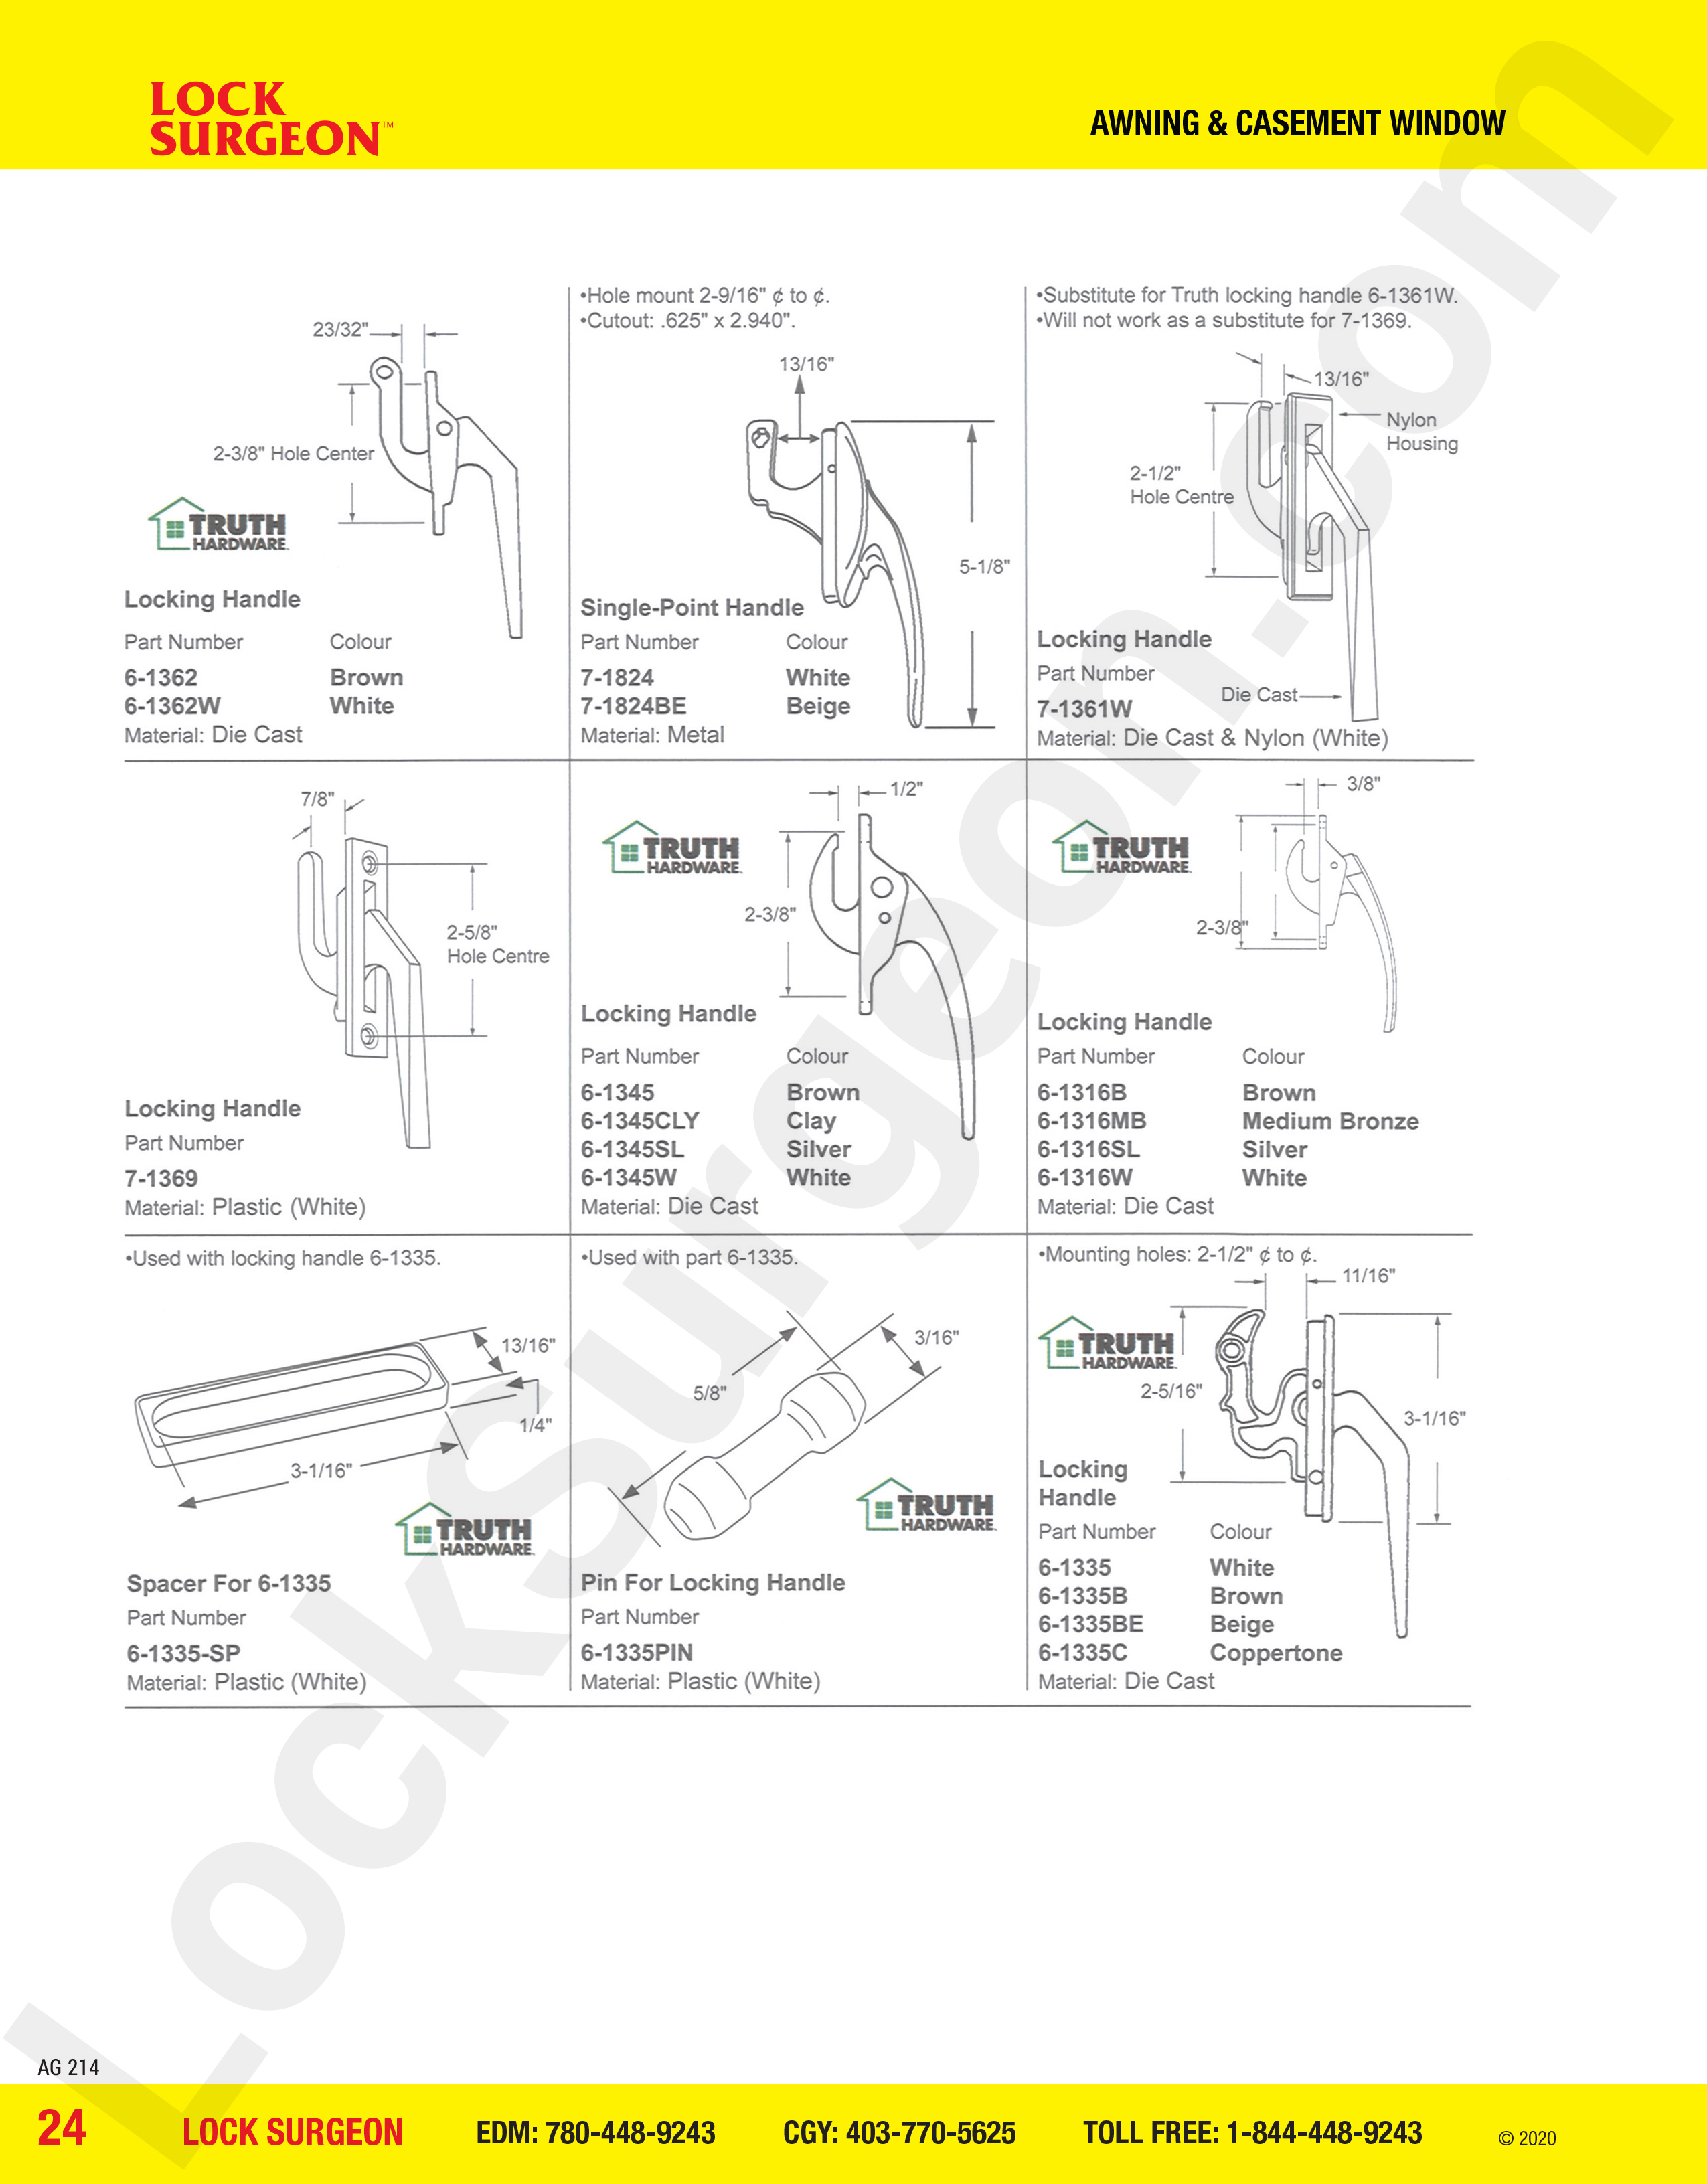 awning and casement window parts for locking handles Acheson mobile